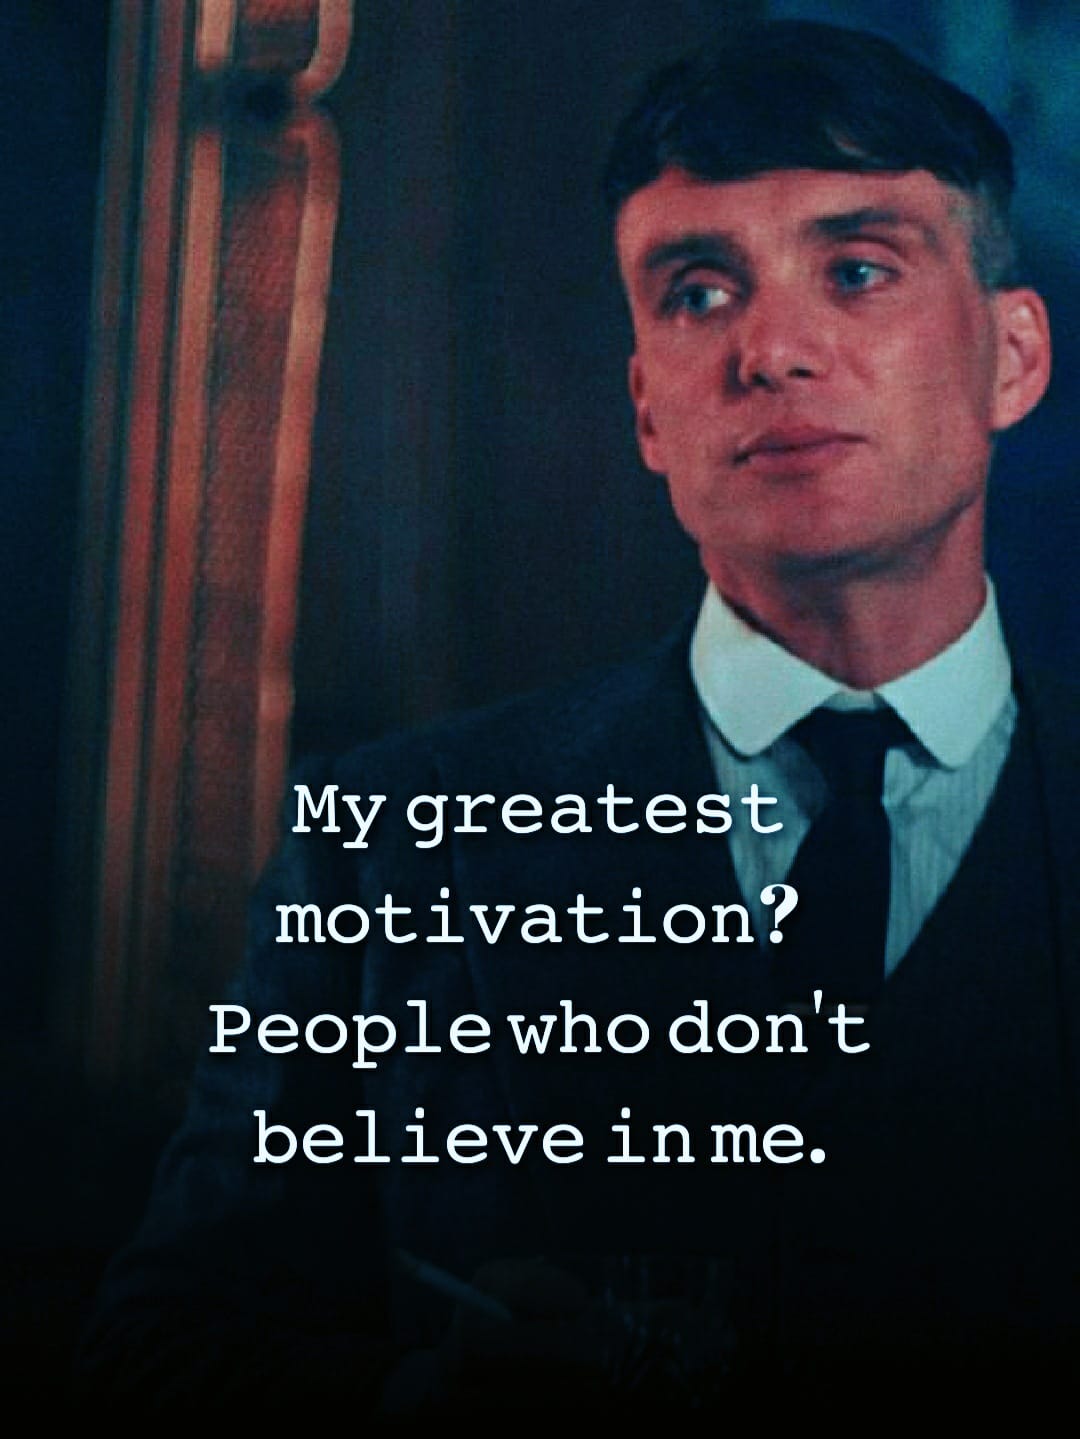 My greatest motivation? People who don’t believe in me.